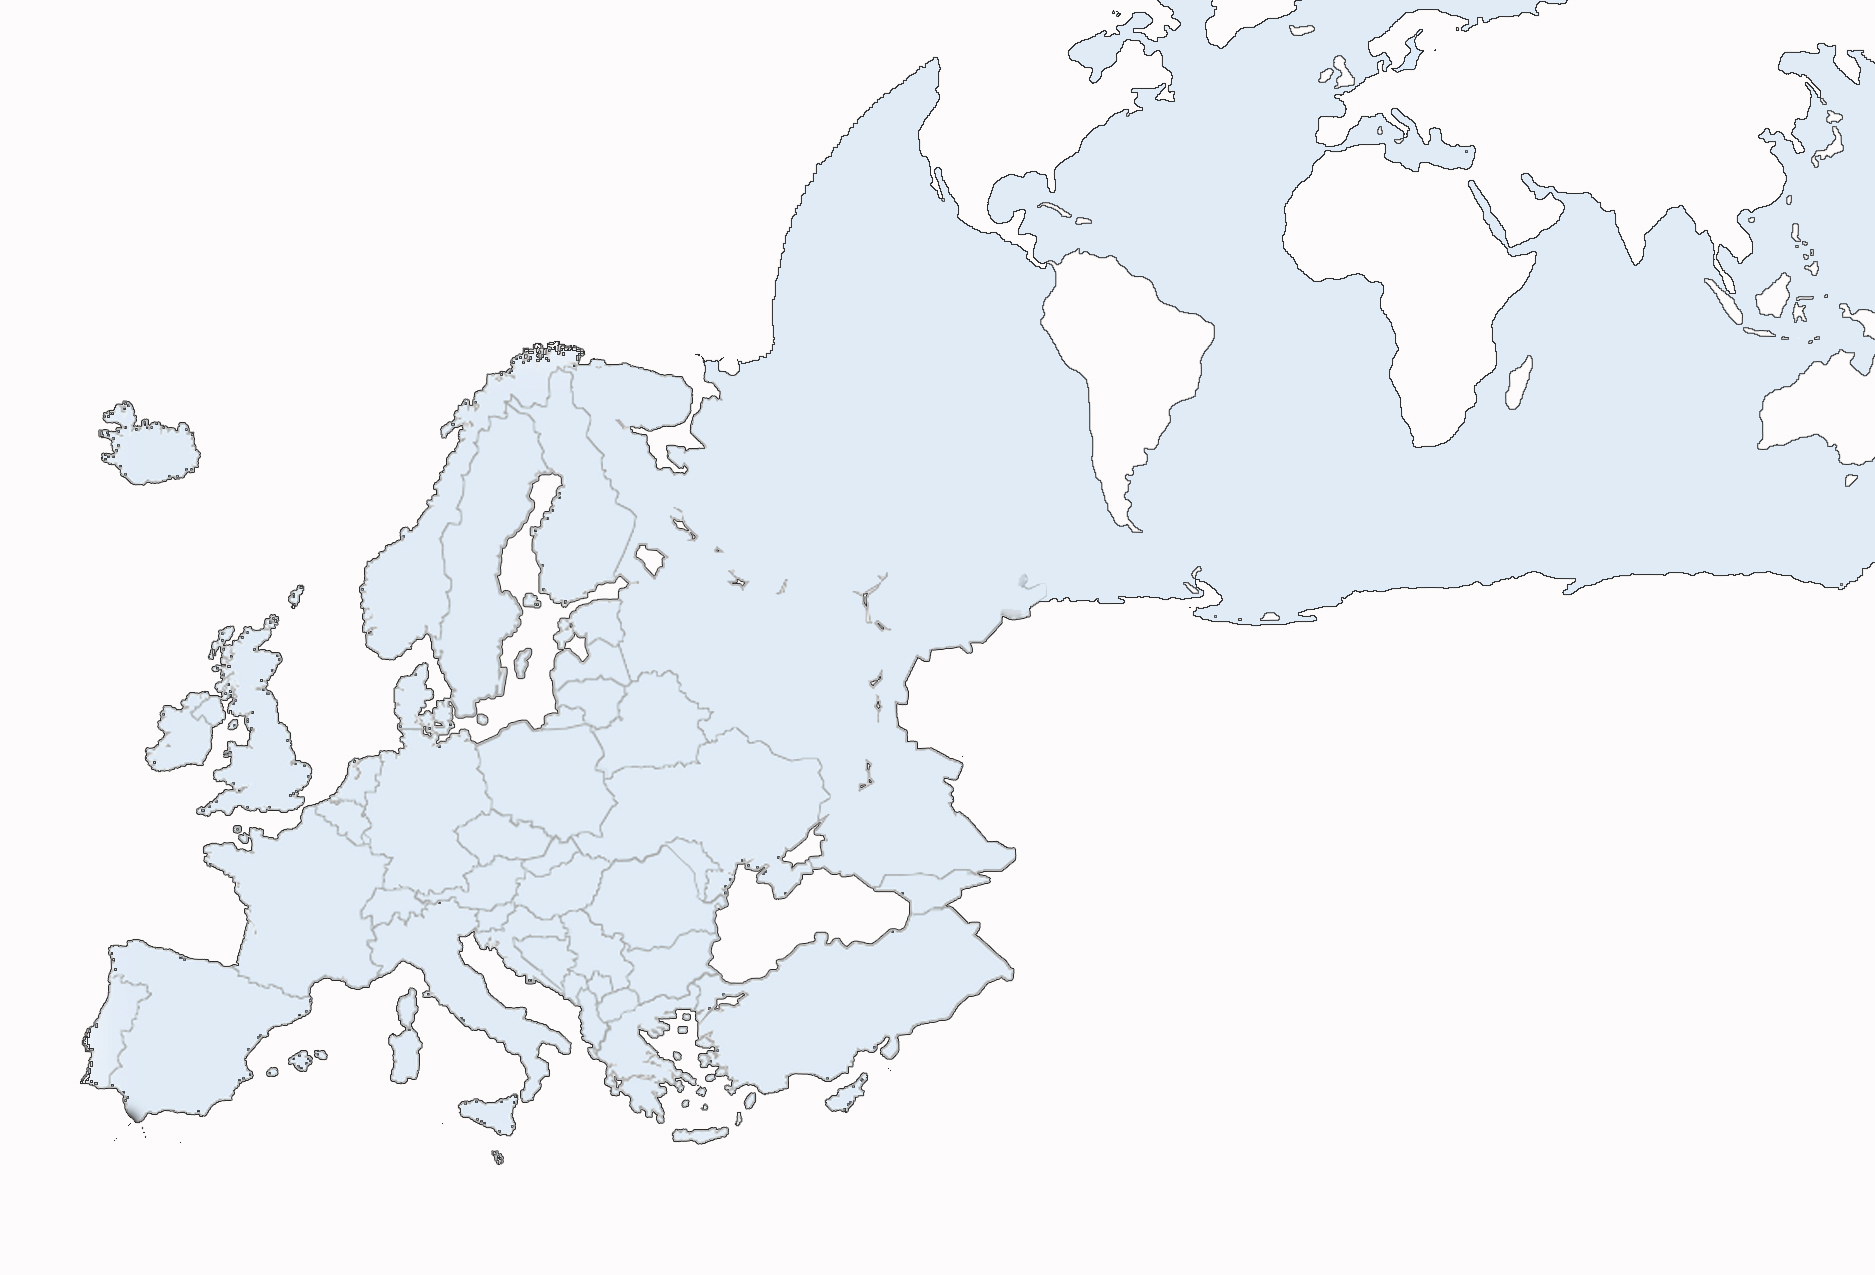 Europe and beyond map